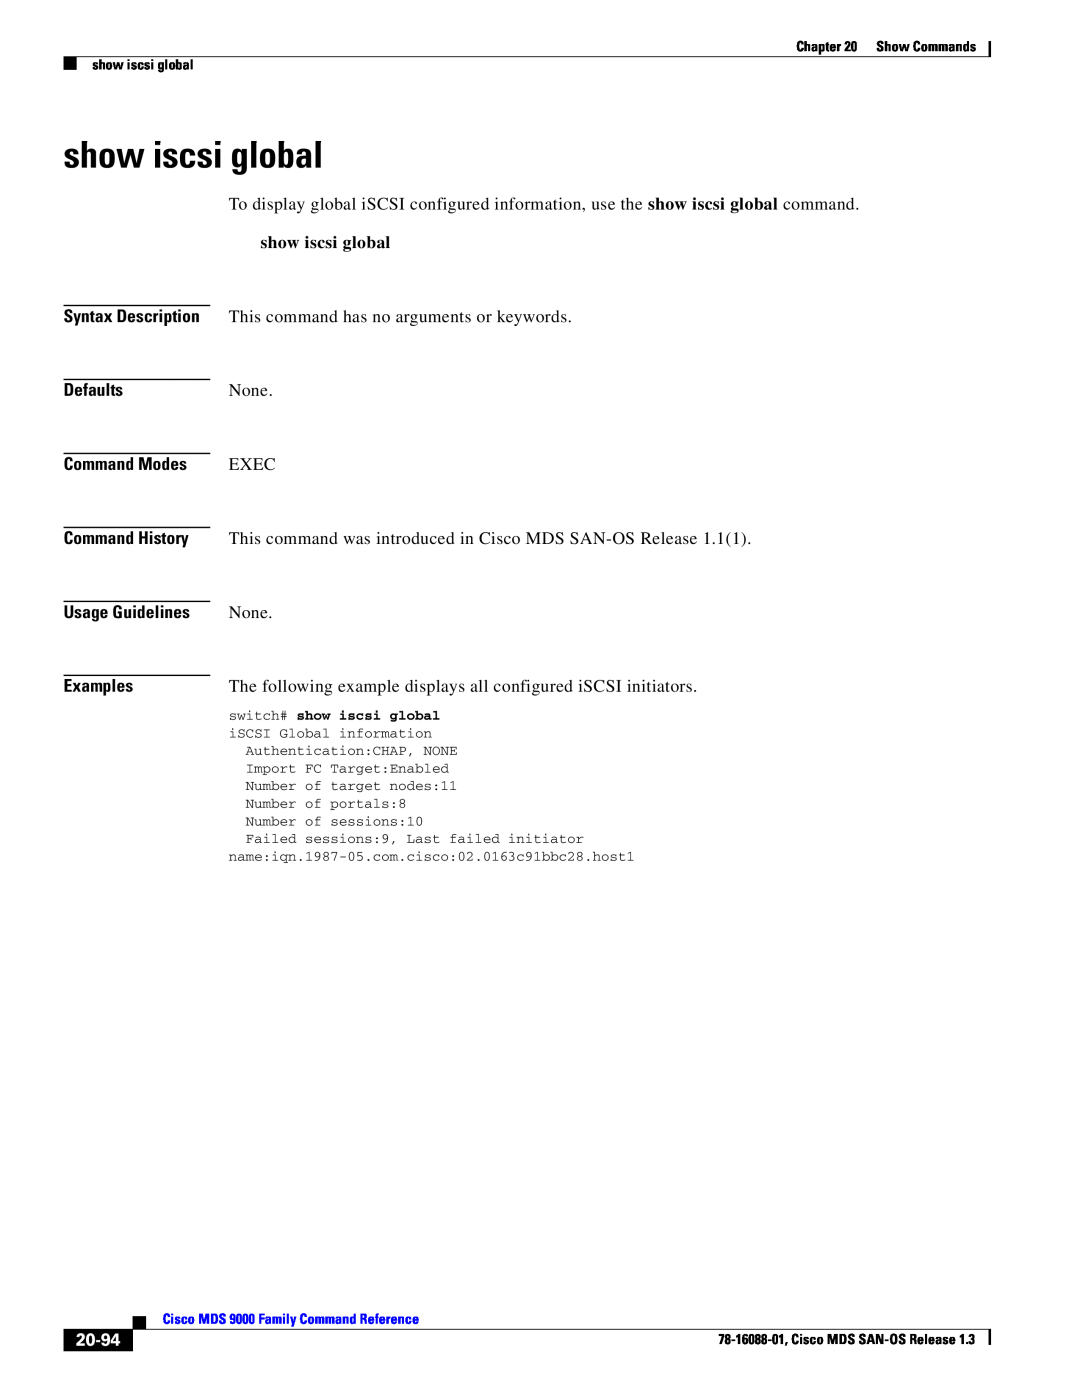 Cisco Systems MDS 9000 manual show iscsi global, 20-94, Defaults, Command Modes, Usage Guidelines, Examples 